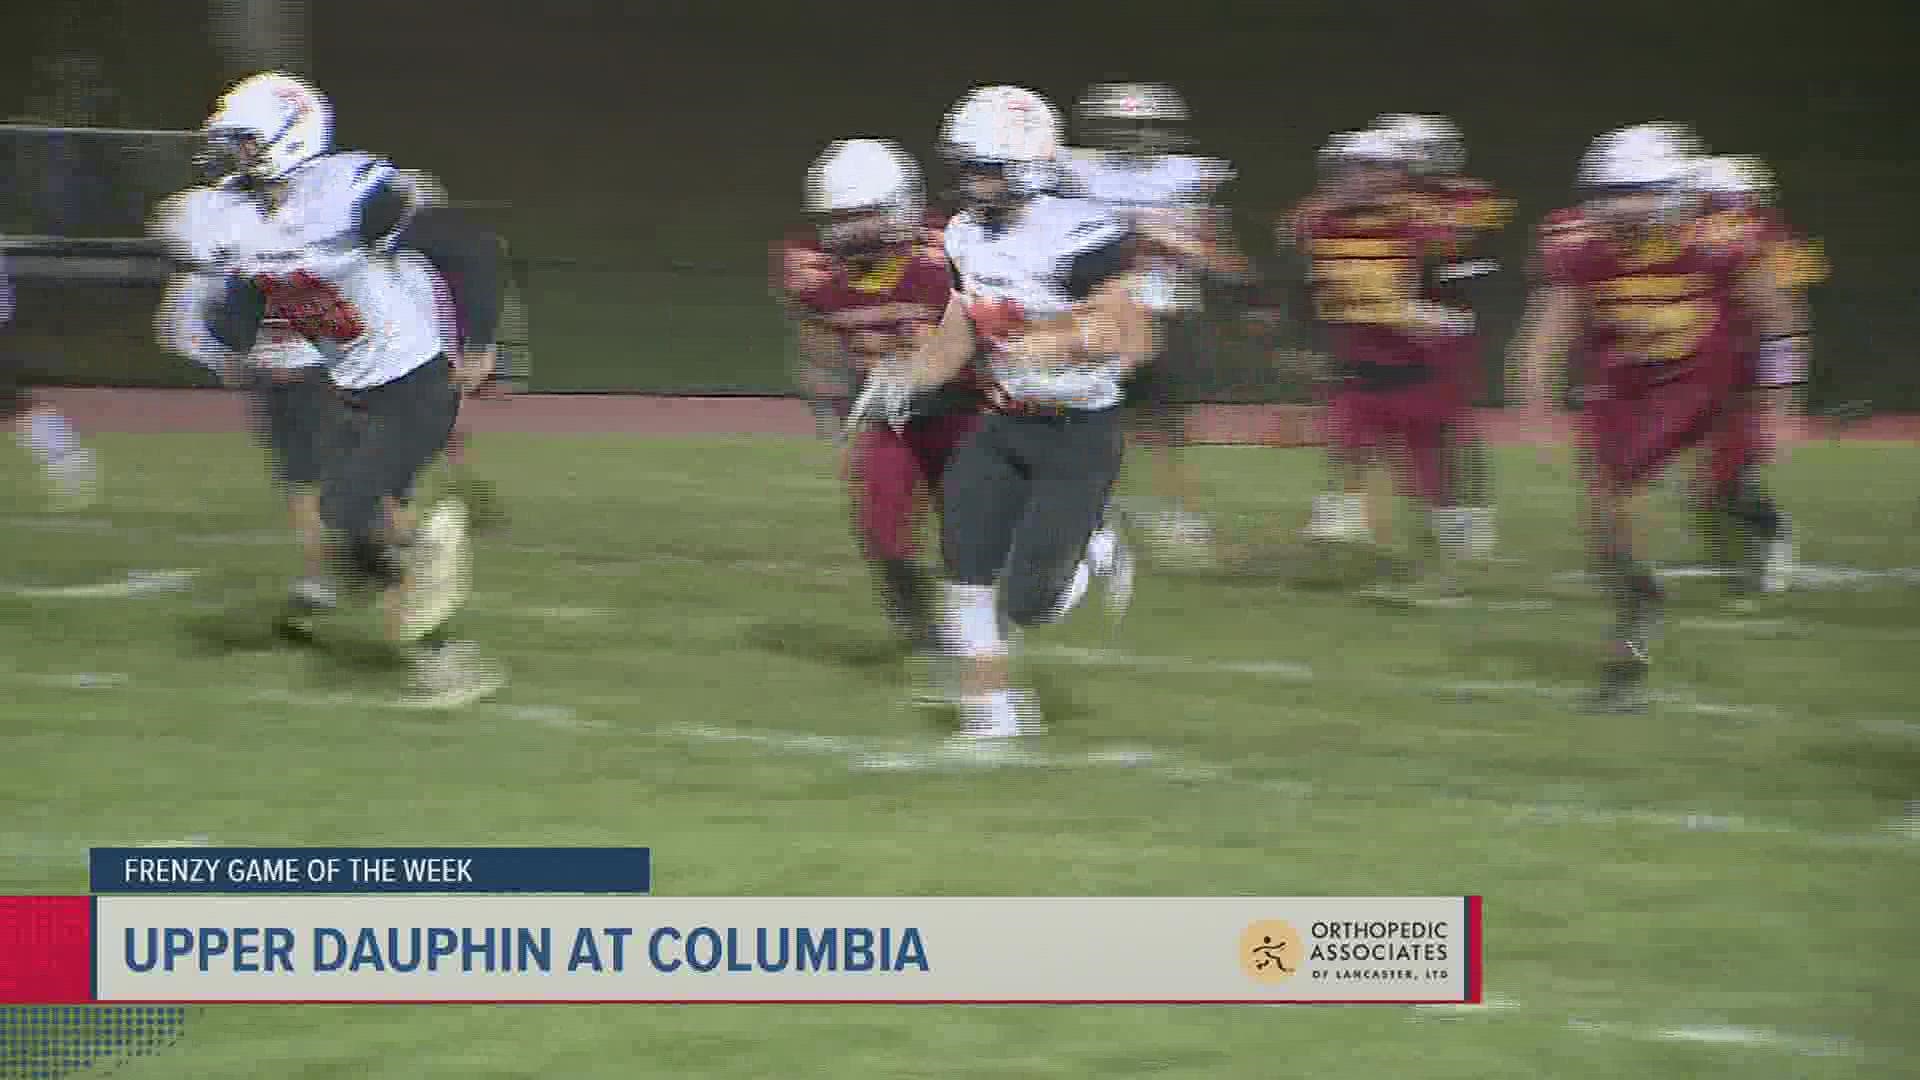 Upper Dauphin tops Columbia in an offensive slugfest to kick off the district playoffs.